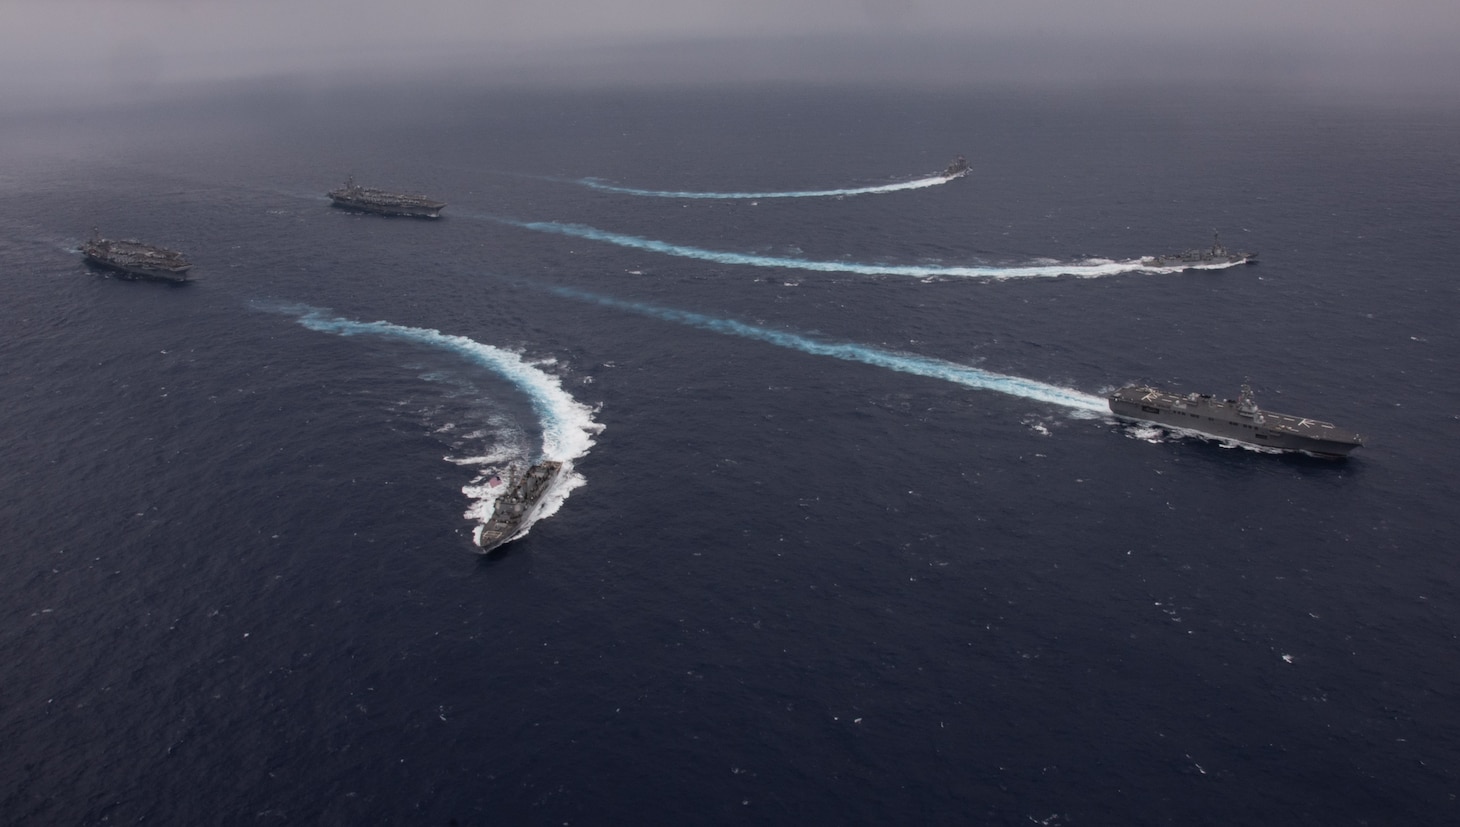 PHILIPPINE SEA (Nov. 7, 2023) Nimitz-class aircraft carriers, USS Ronald Reagan (CVN 76) and USS Carl Vinson (CVN 70), steam in formation with Japan Maritime Self-Defense Force (JMSDF) first-in-class helicopter destroyer, JS Hyuga (DDH 181), as Ticonderoga-class guided-missile cruisers, USS Antietam (CG 54) and USS Robert Smalls (CG 62), and Arleigh Burke-class guided-missile destroyers, USS Sterett (DDG 104) and USS Kidd (DDG 100), break away from formation during the Multi-Large Deck Exercise (MLDE) in the Philippine Sea, Nov. 7. Ronald Reagan is participating in the bilateral MLDE, which features the ships and aircraft of JMSDF Escort Flotilla 3, as well as the U.S. Navy’s Carrier Strike Group 1 and Carrier Strike Group 5. MLDE is a multi-domain event that grows the already strong partnership and interoperability that exists between the JMSDF and U.S. Navy today. (U.S. Navy photo by Mass Communication Specialist 3rd Class Natasha ChevalierLosada)